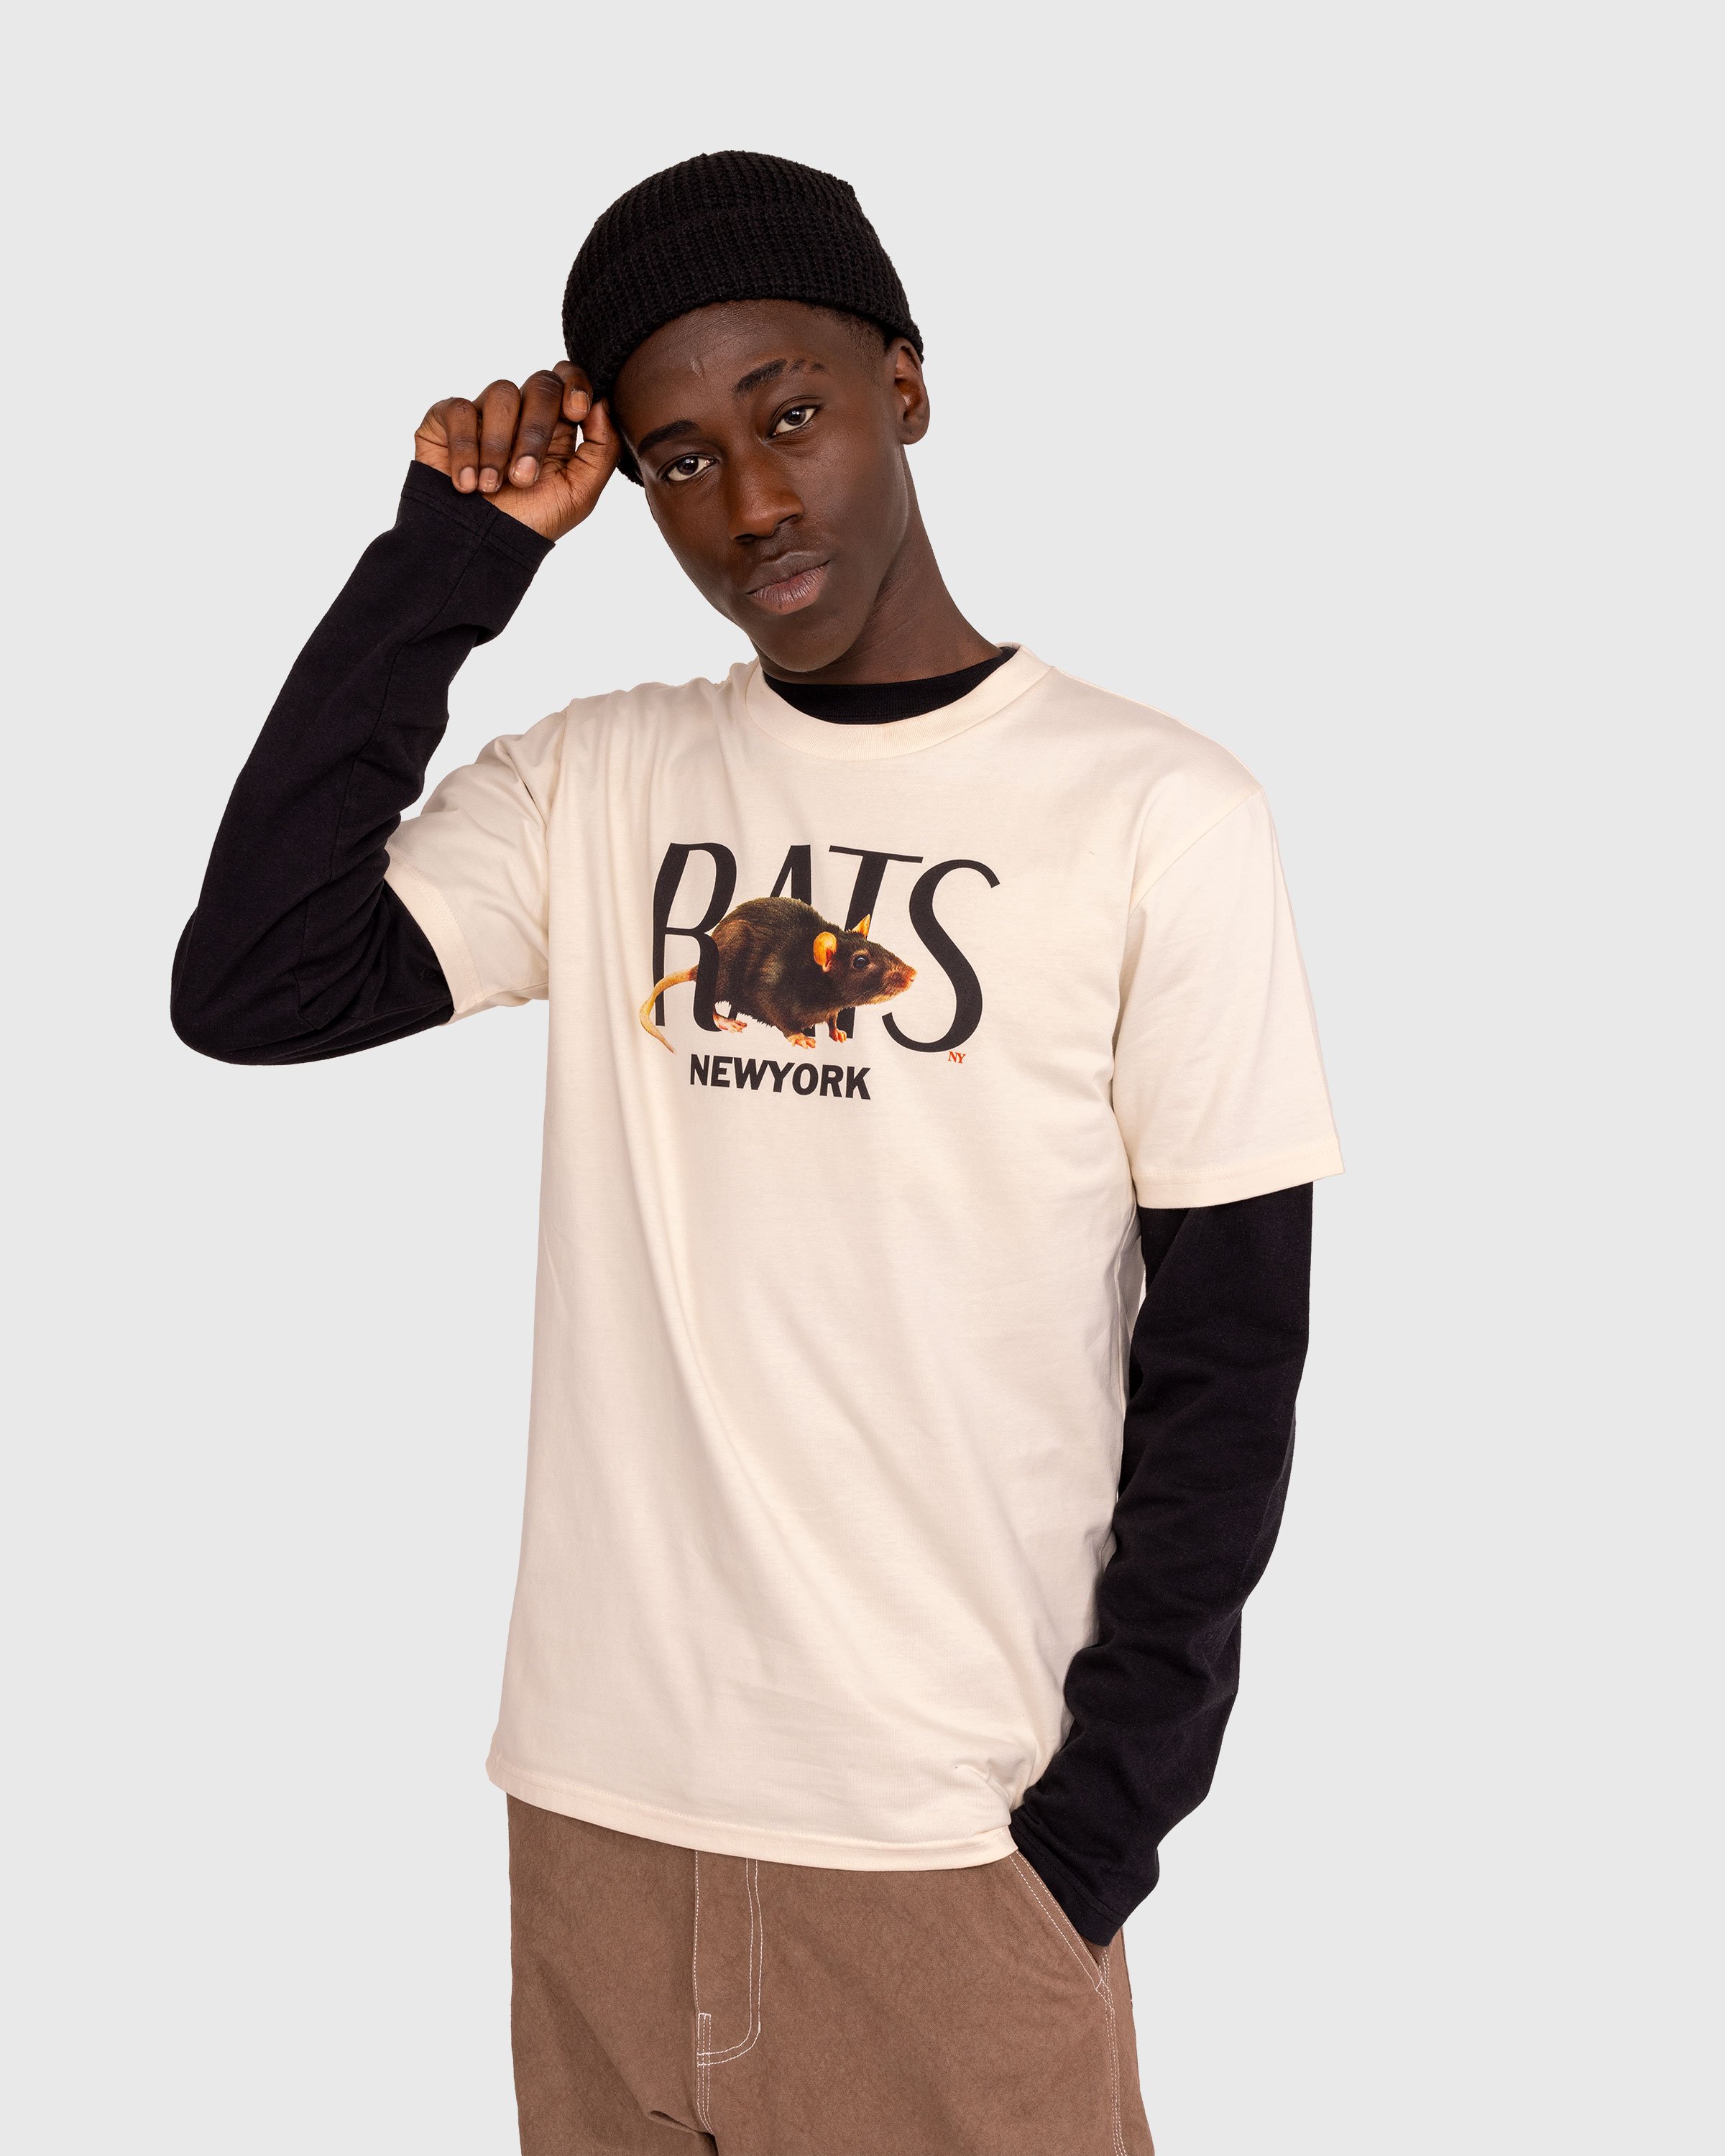 At The Moment x Highsnobiety - New York Rats T-Shirt - Clothing - Beige - Image 3